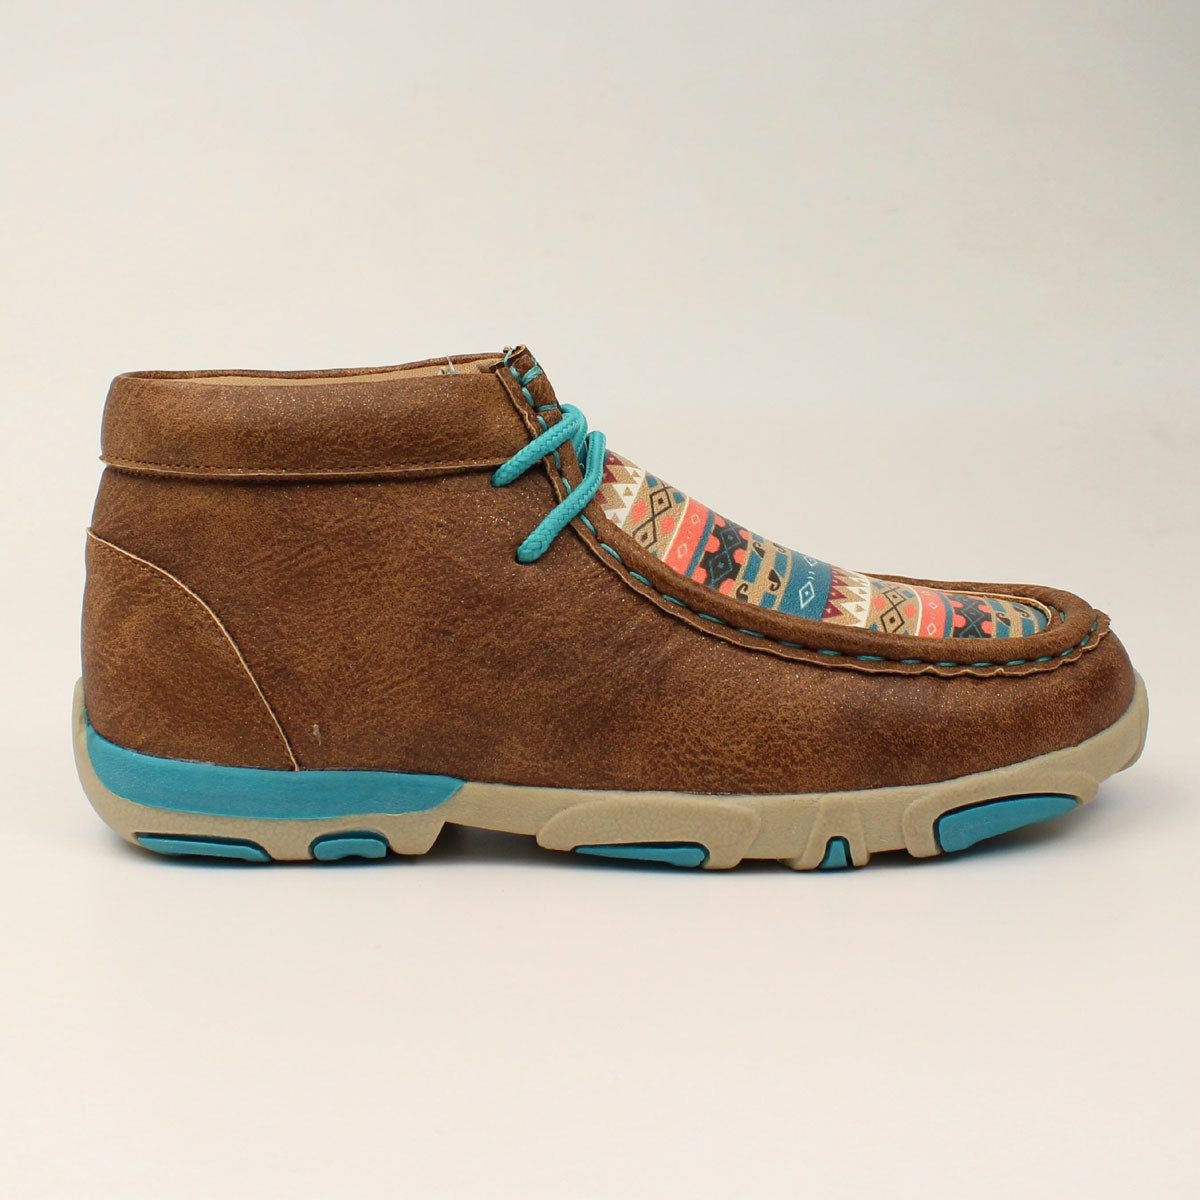 Twister Children's Landry Chukka Shoes - Brown/Turquoise Aztec